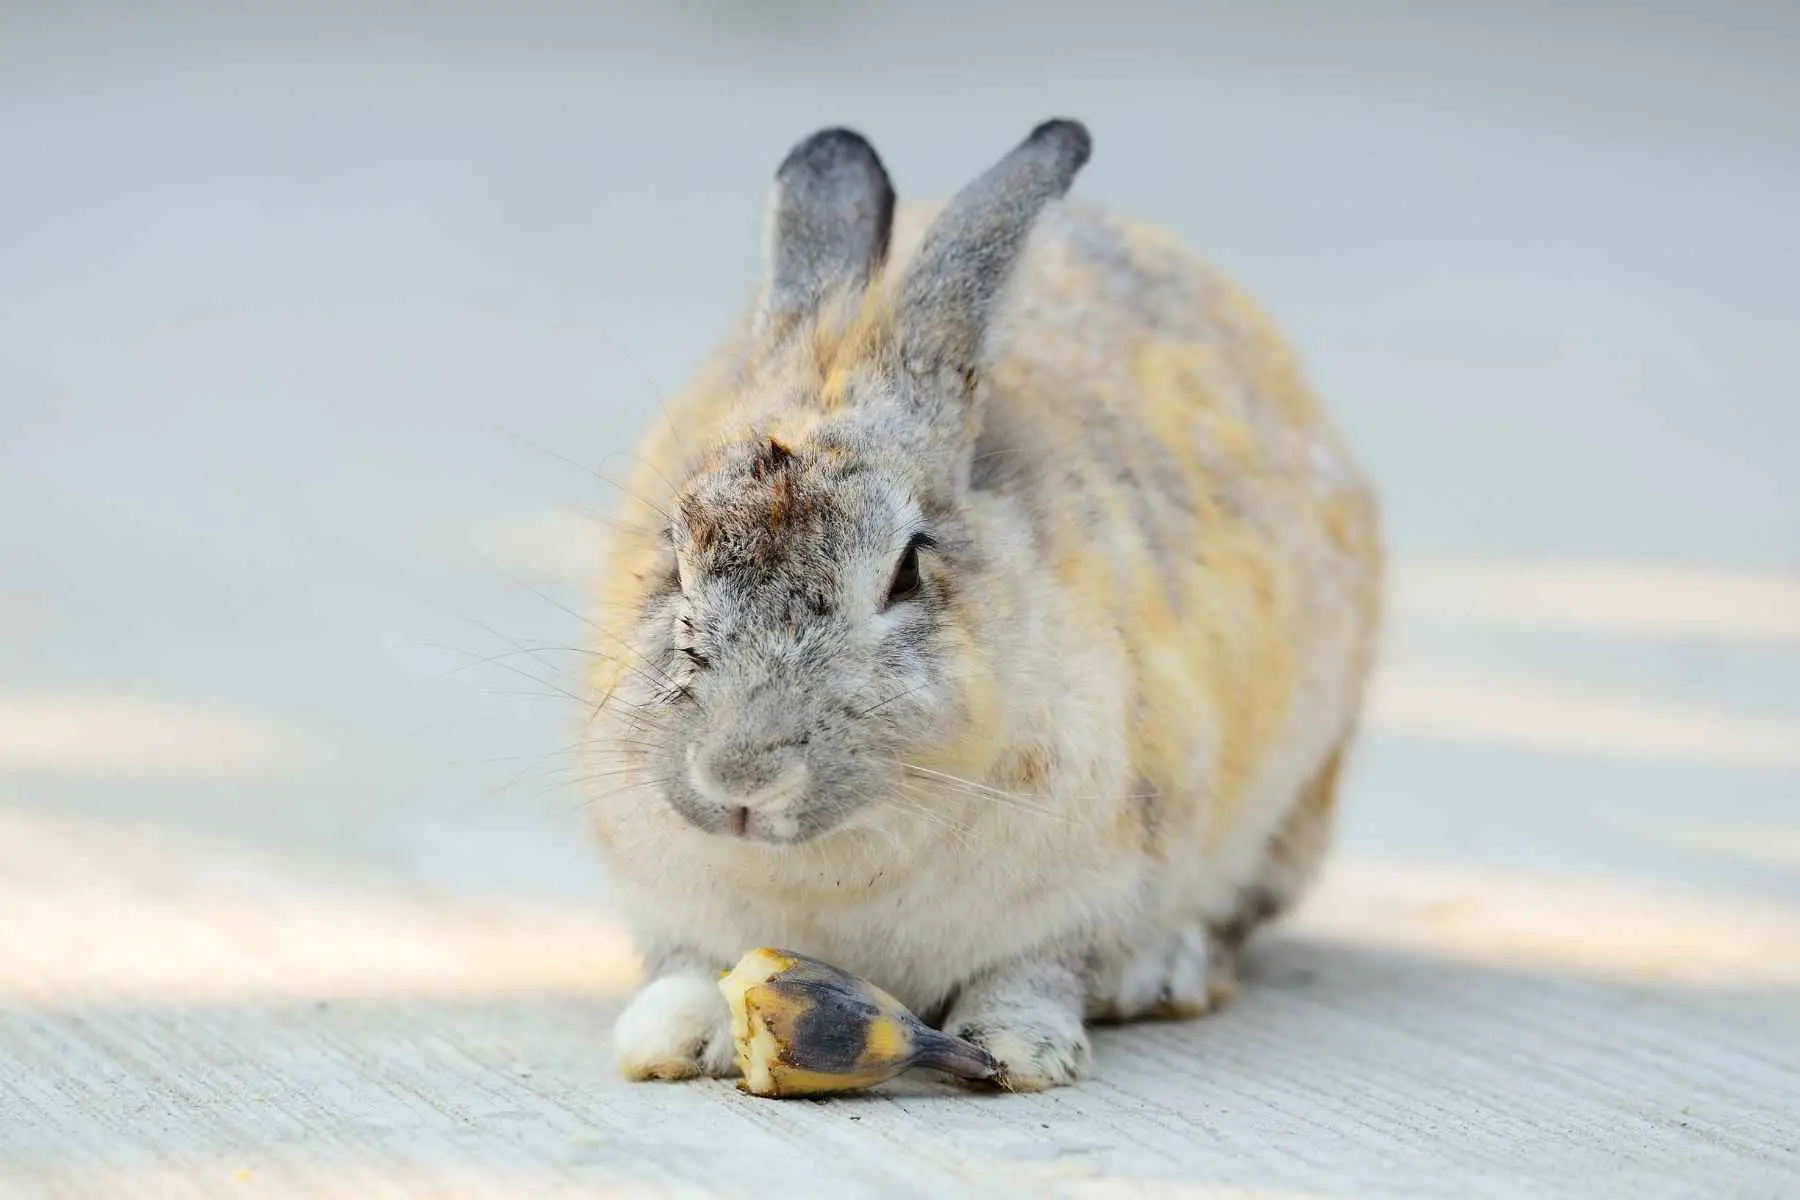 Rabbit eating a small piece of banana with peel